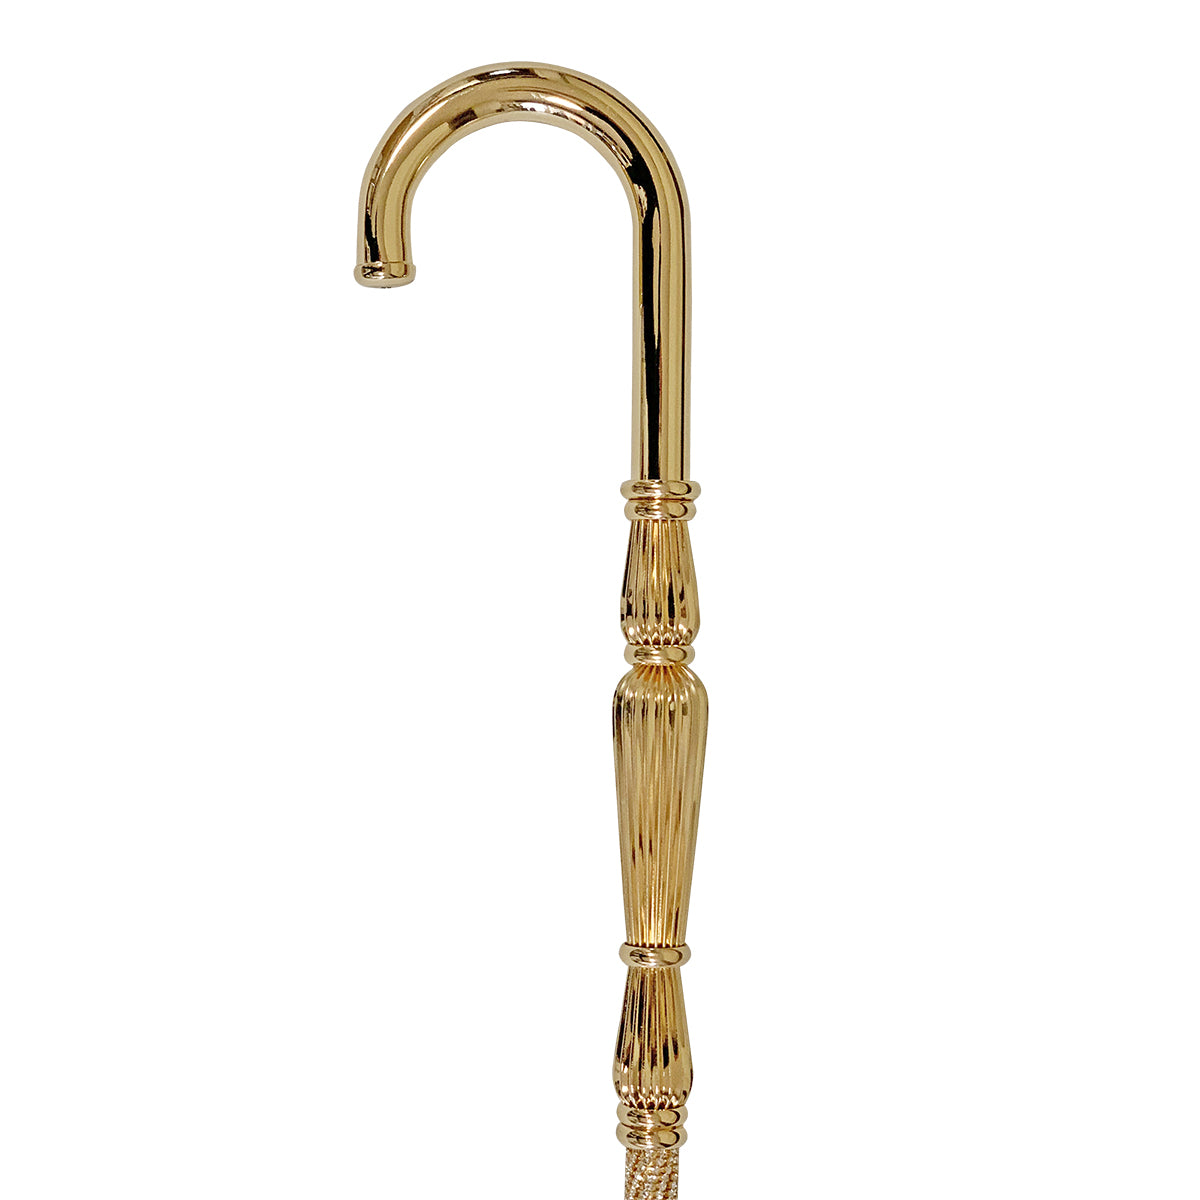 Luxury Gold plated 24K walking stick encrusted with thousands of crystals